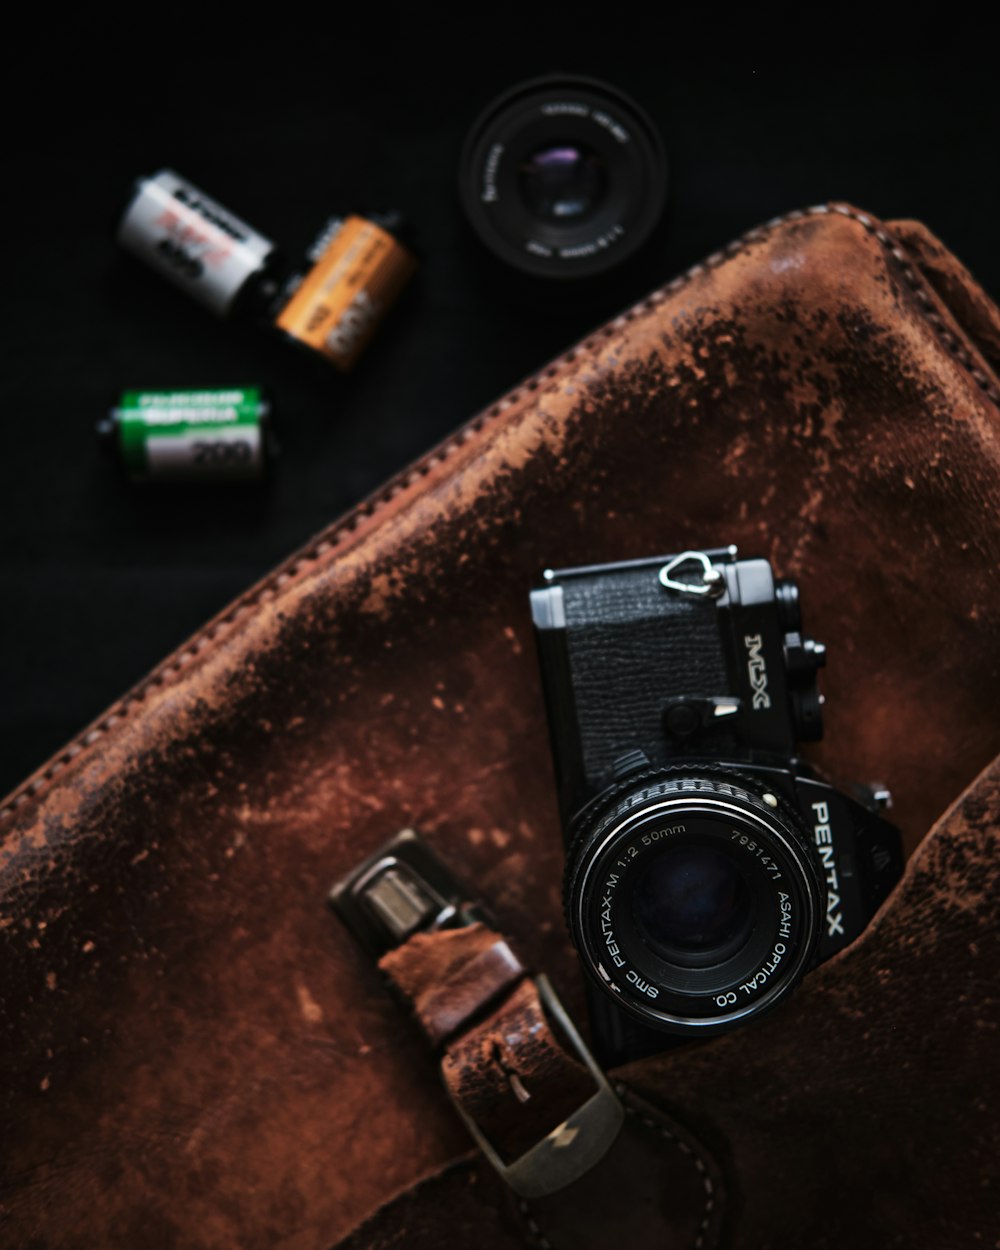 black and silver camera on brown leather textile